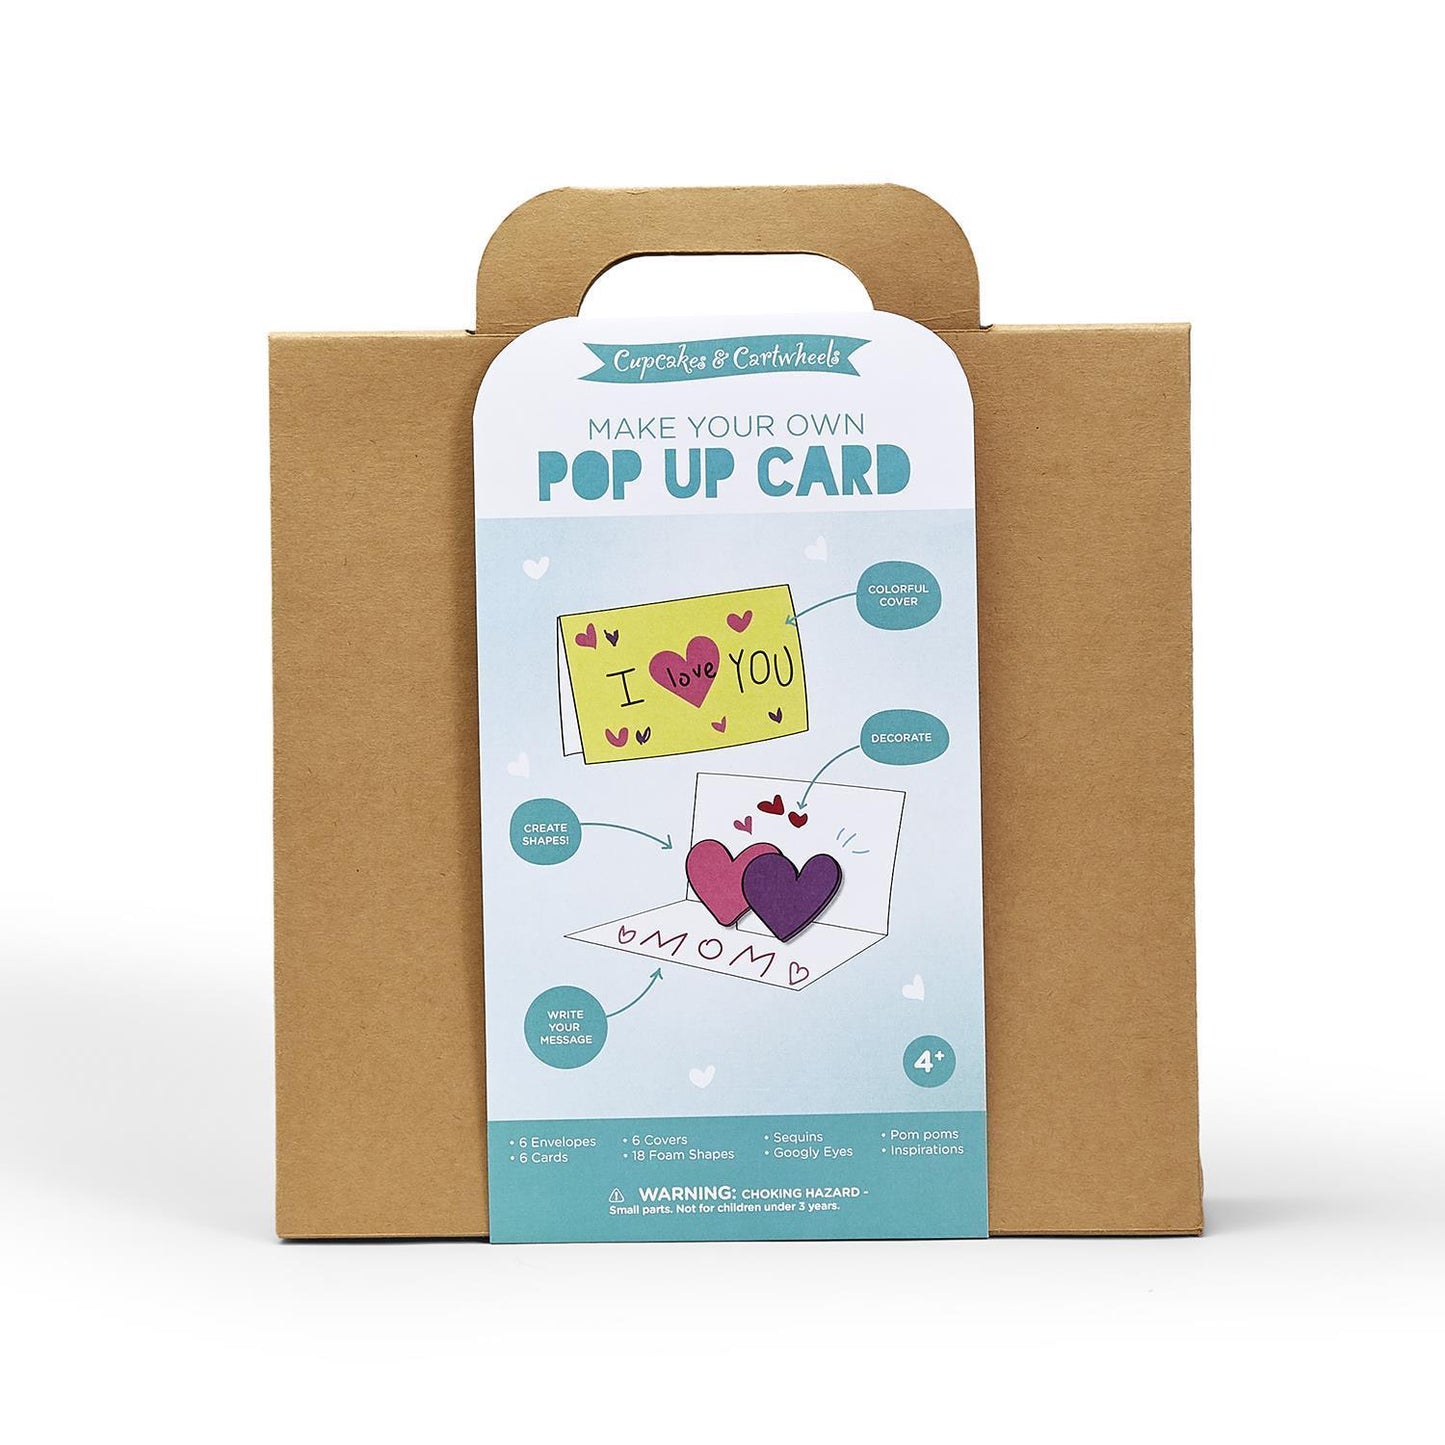 POP UP CARD: Make Your Own